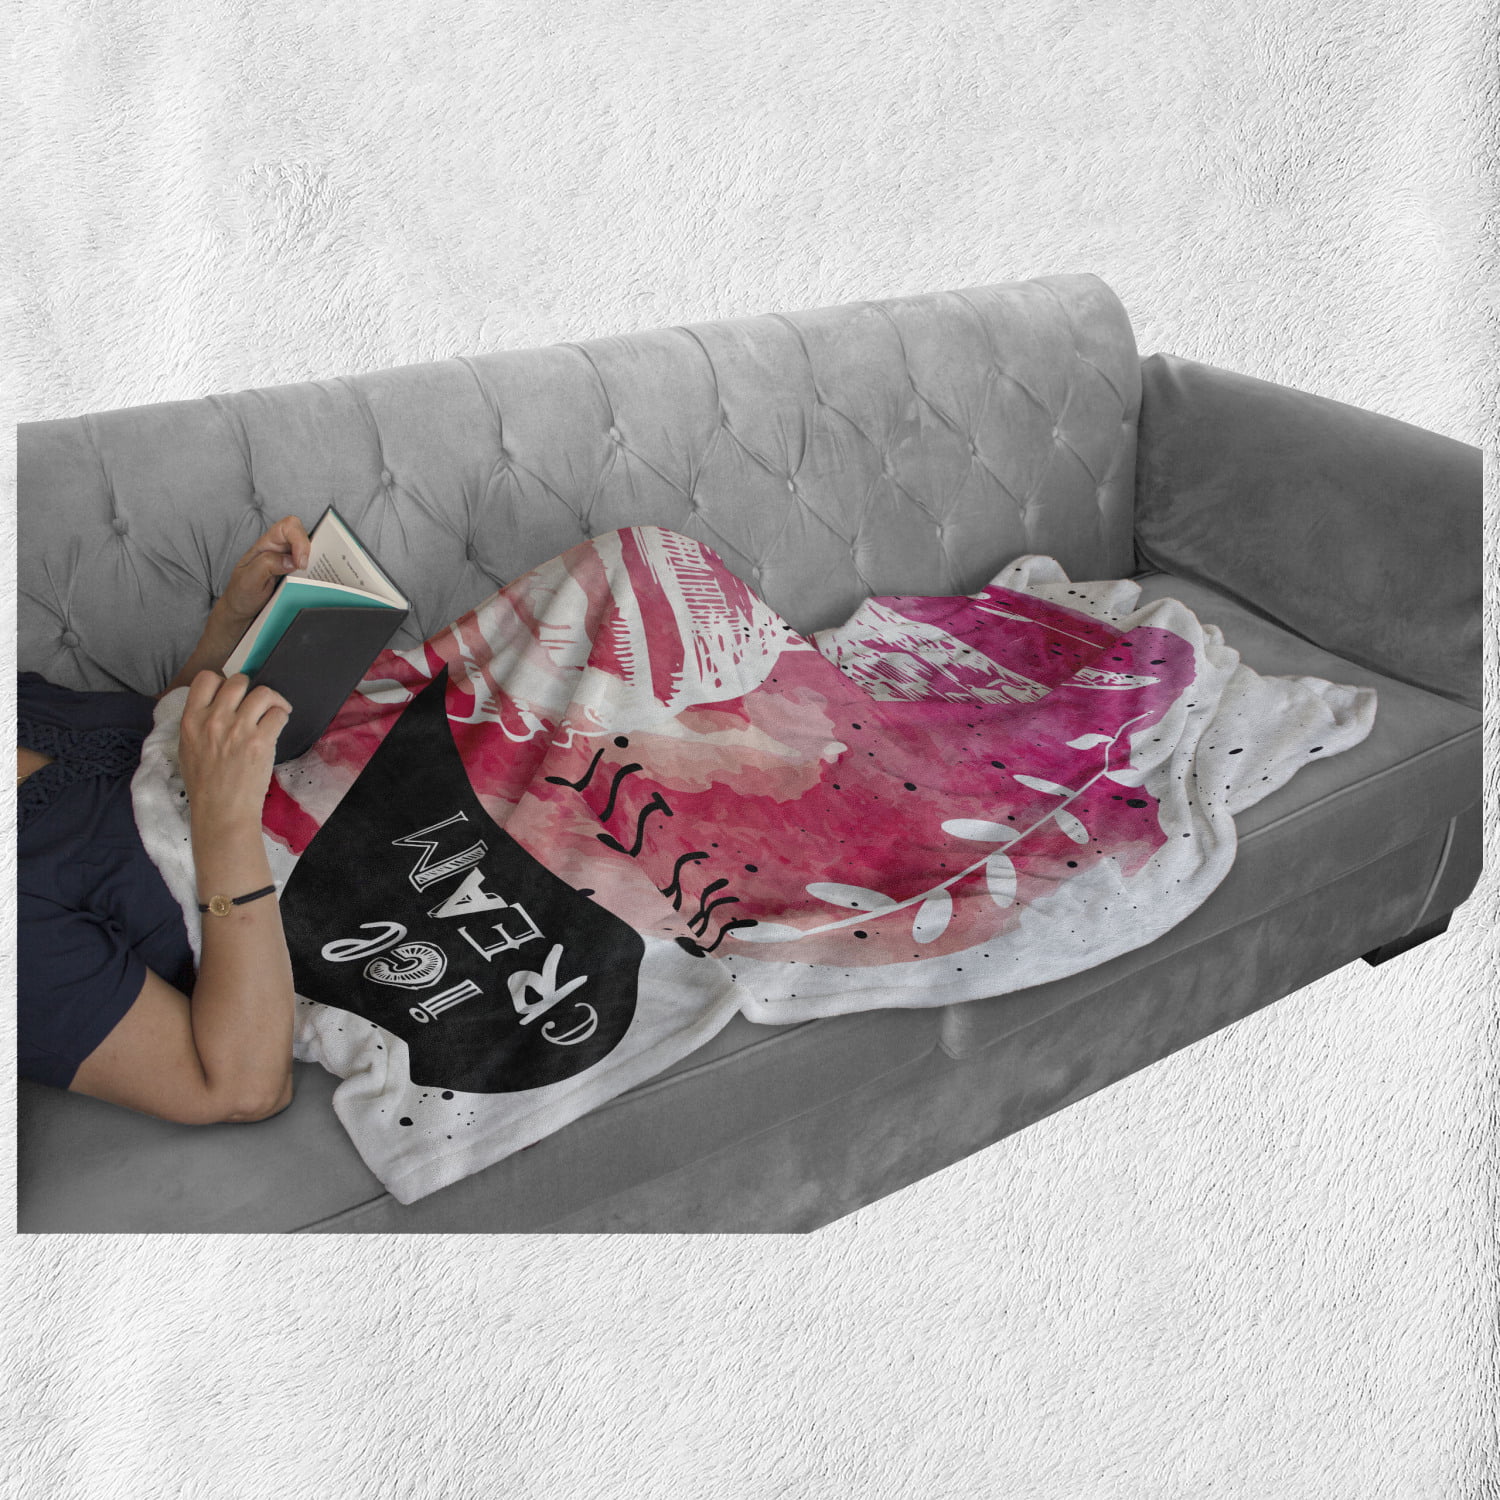 Cozy Plush for Indoor and Outdoor Use 60 x 80 Ambesonne Ice Cream Soft Flannel Fleece Throw Blanket Yummy with Try It Words Paintbrush Watercolor Artwork Illustration Pink Black White